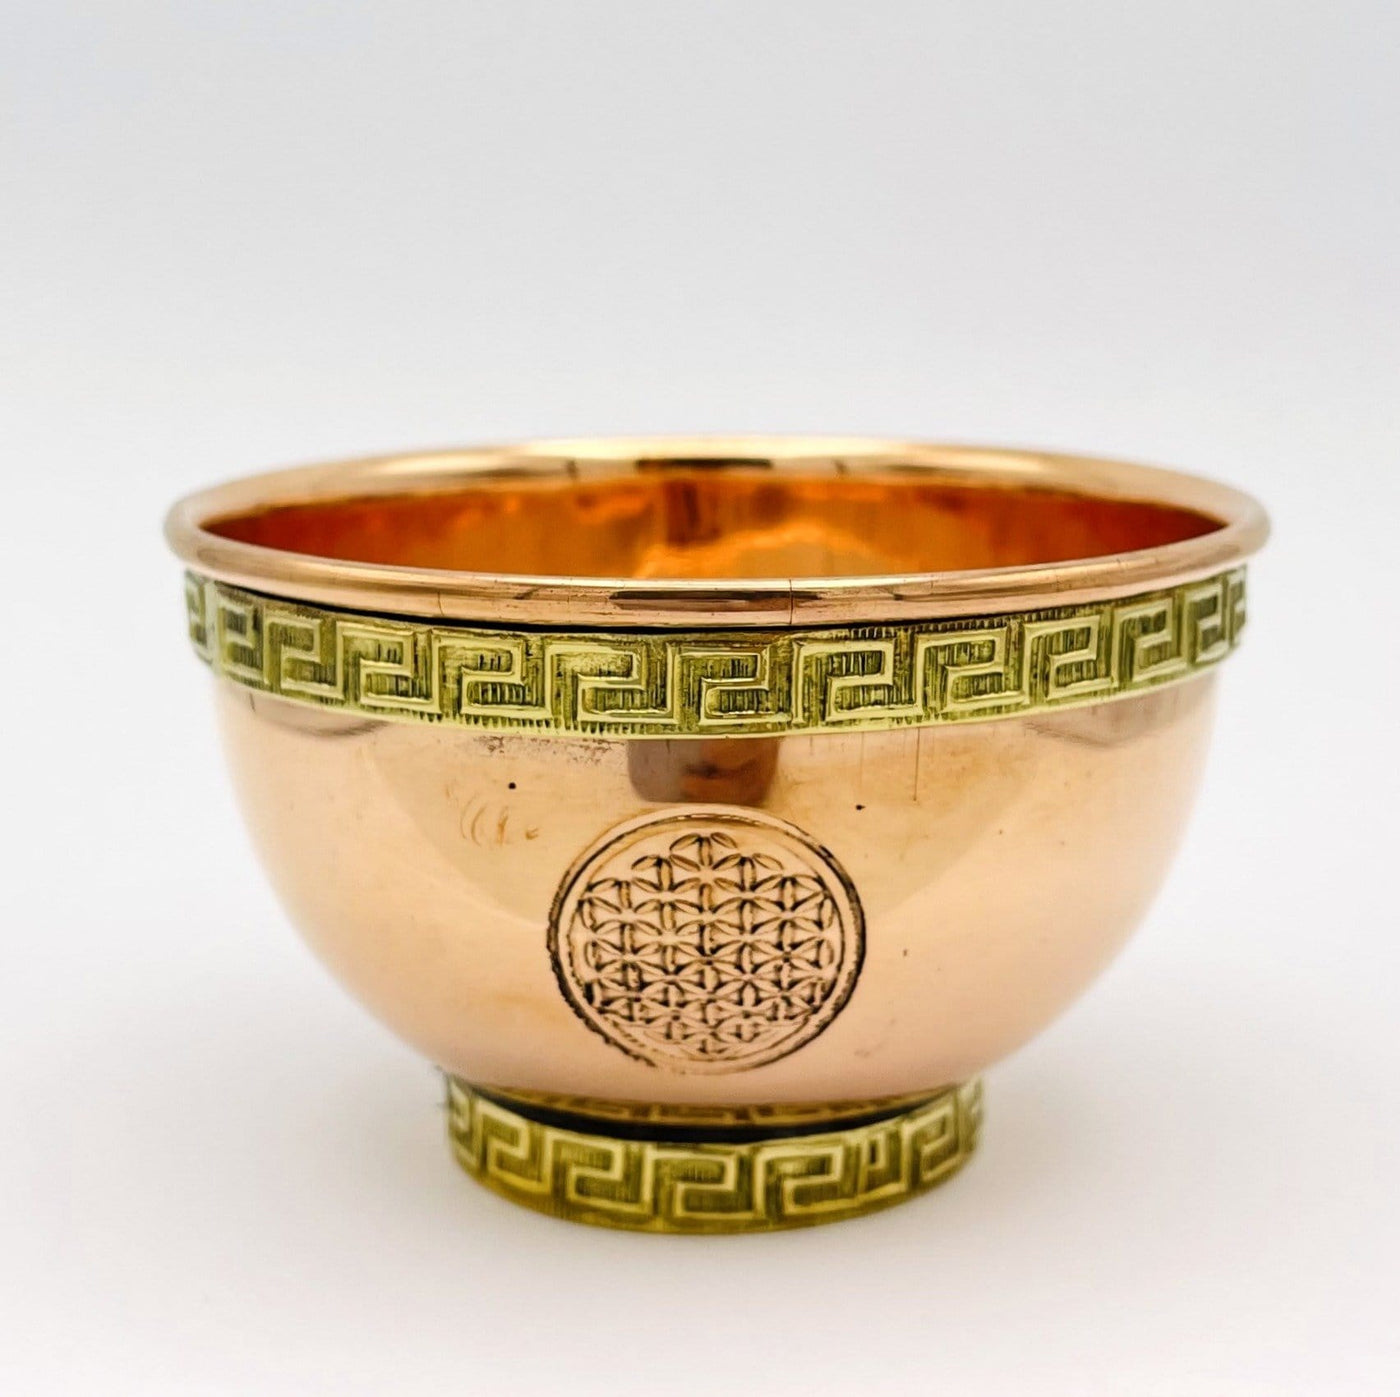 offering bowls have engraved designs on the top and the bottom portions